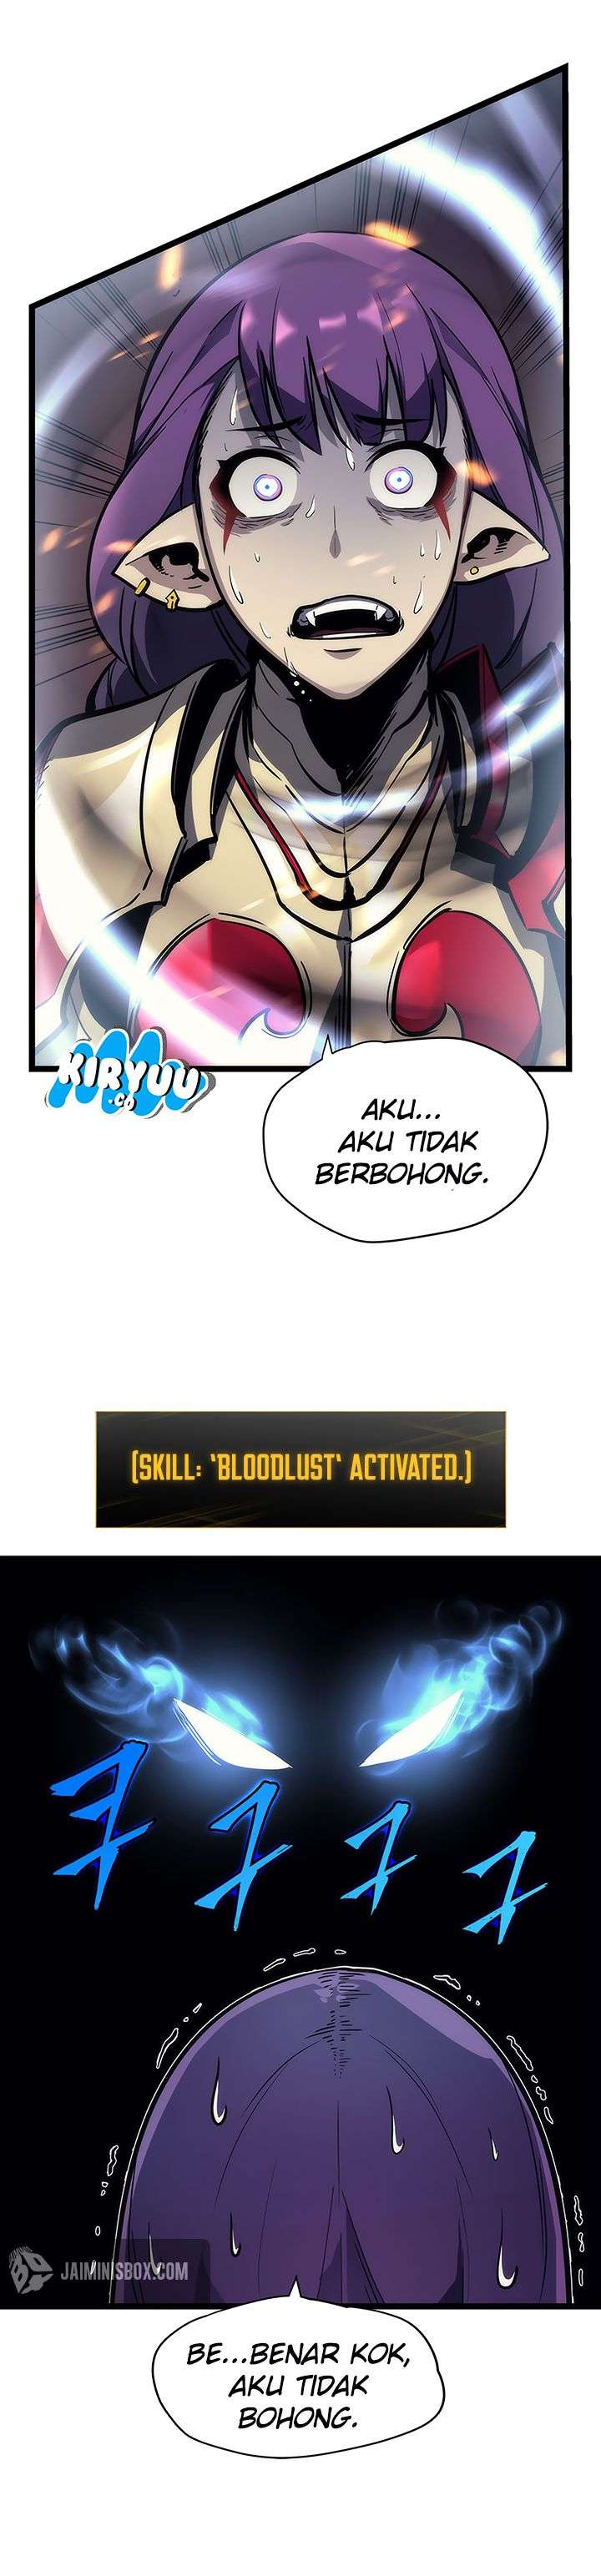 Solo Leveling Chapter 82 Bahasa Indonesia